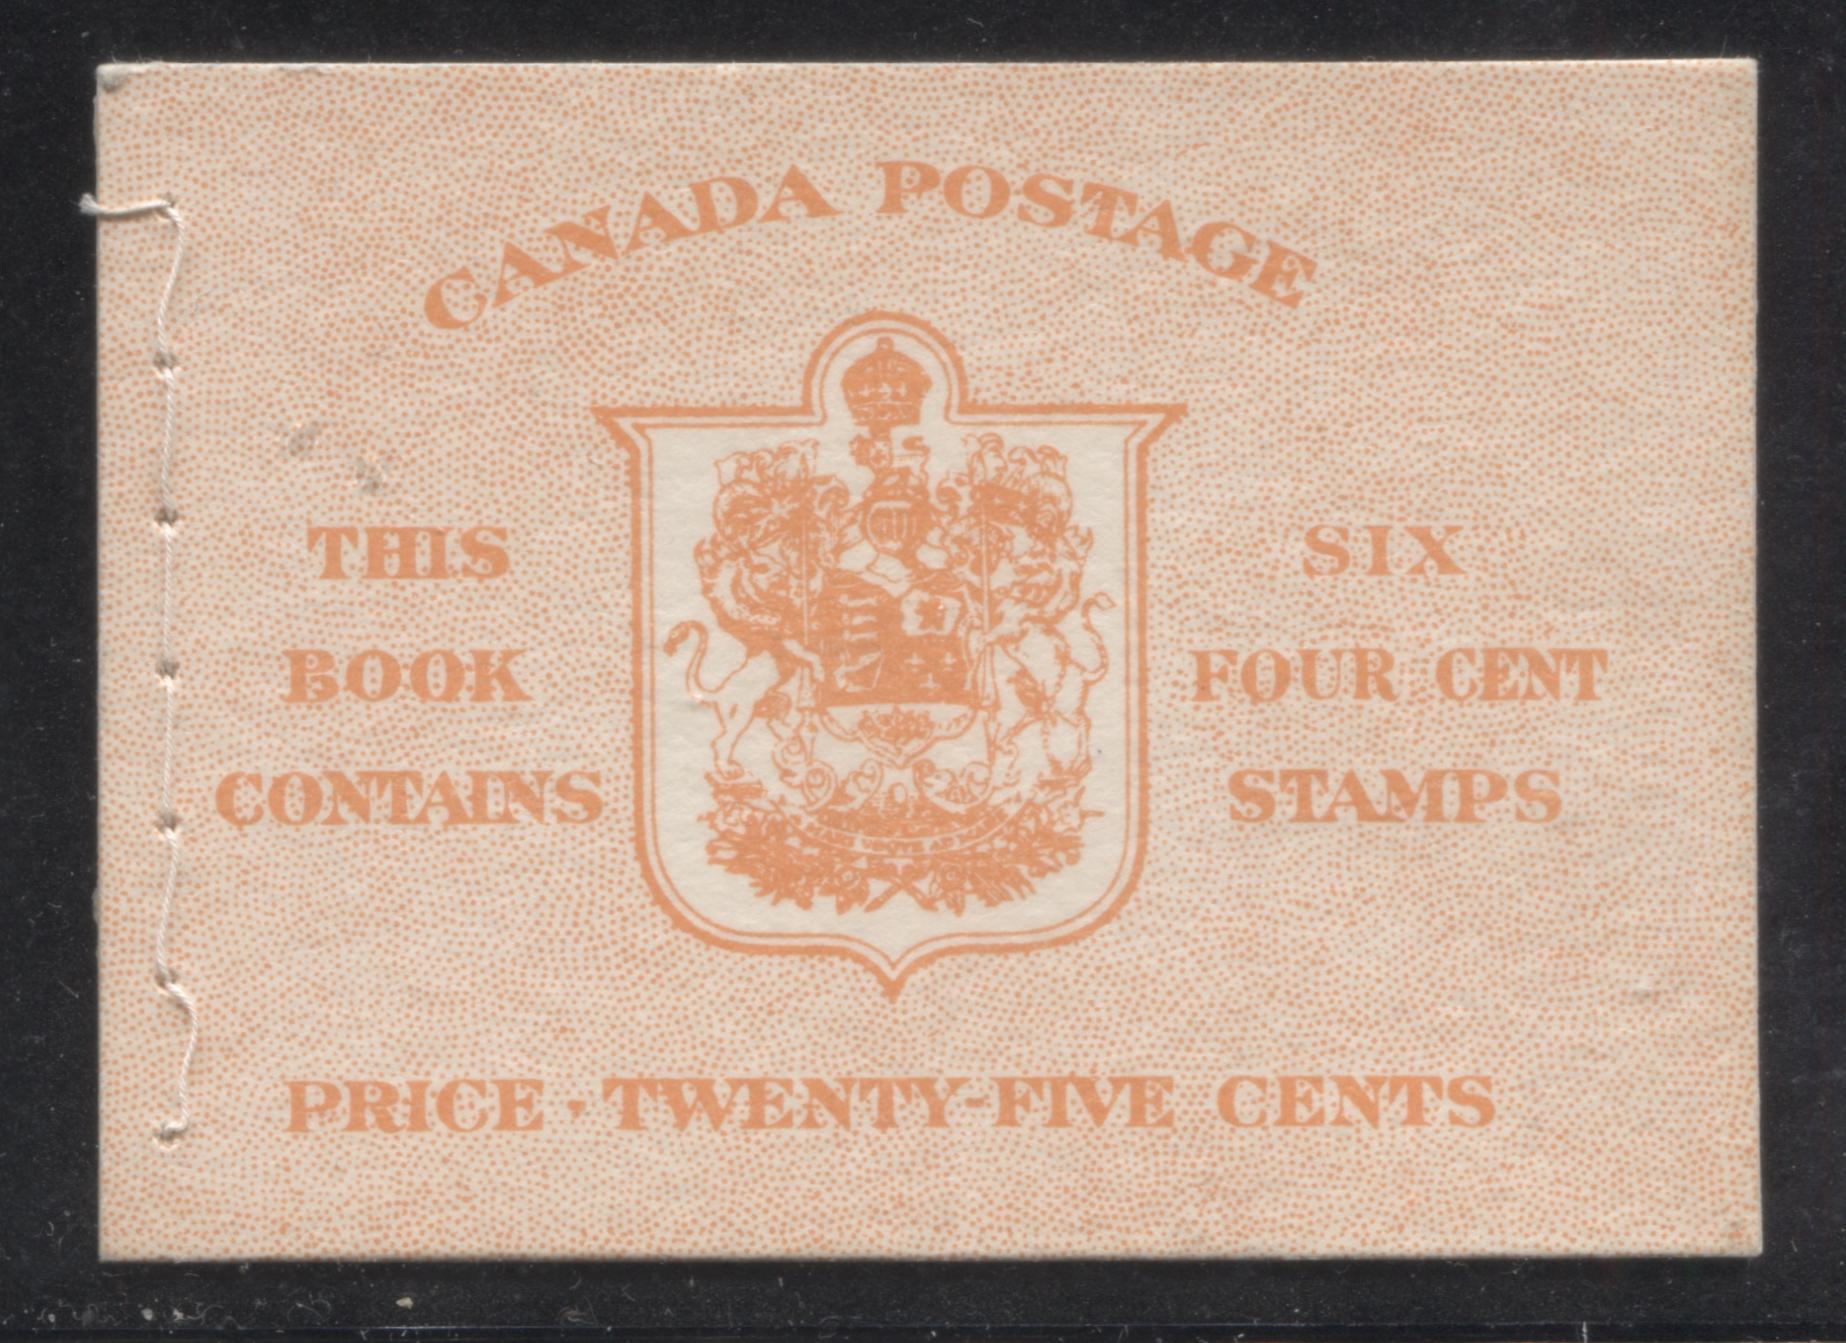 Canada #BK41c 1949-1953 Postes-Postage Issue Complete 25c, English Booklet Containing 1 Pane of 6 of the 4c Dark Carmine King George VI Harris Front Cover Type IIi , Back Cover Eiv, No Rate Page, Stitched Binding Brixton Chrome 